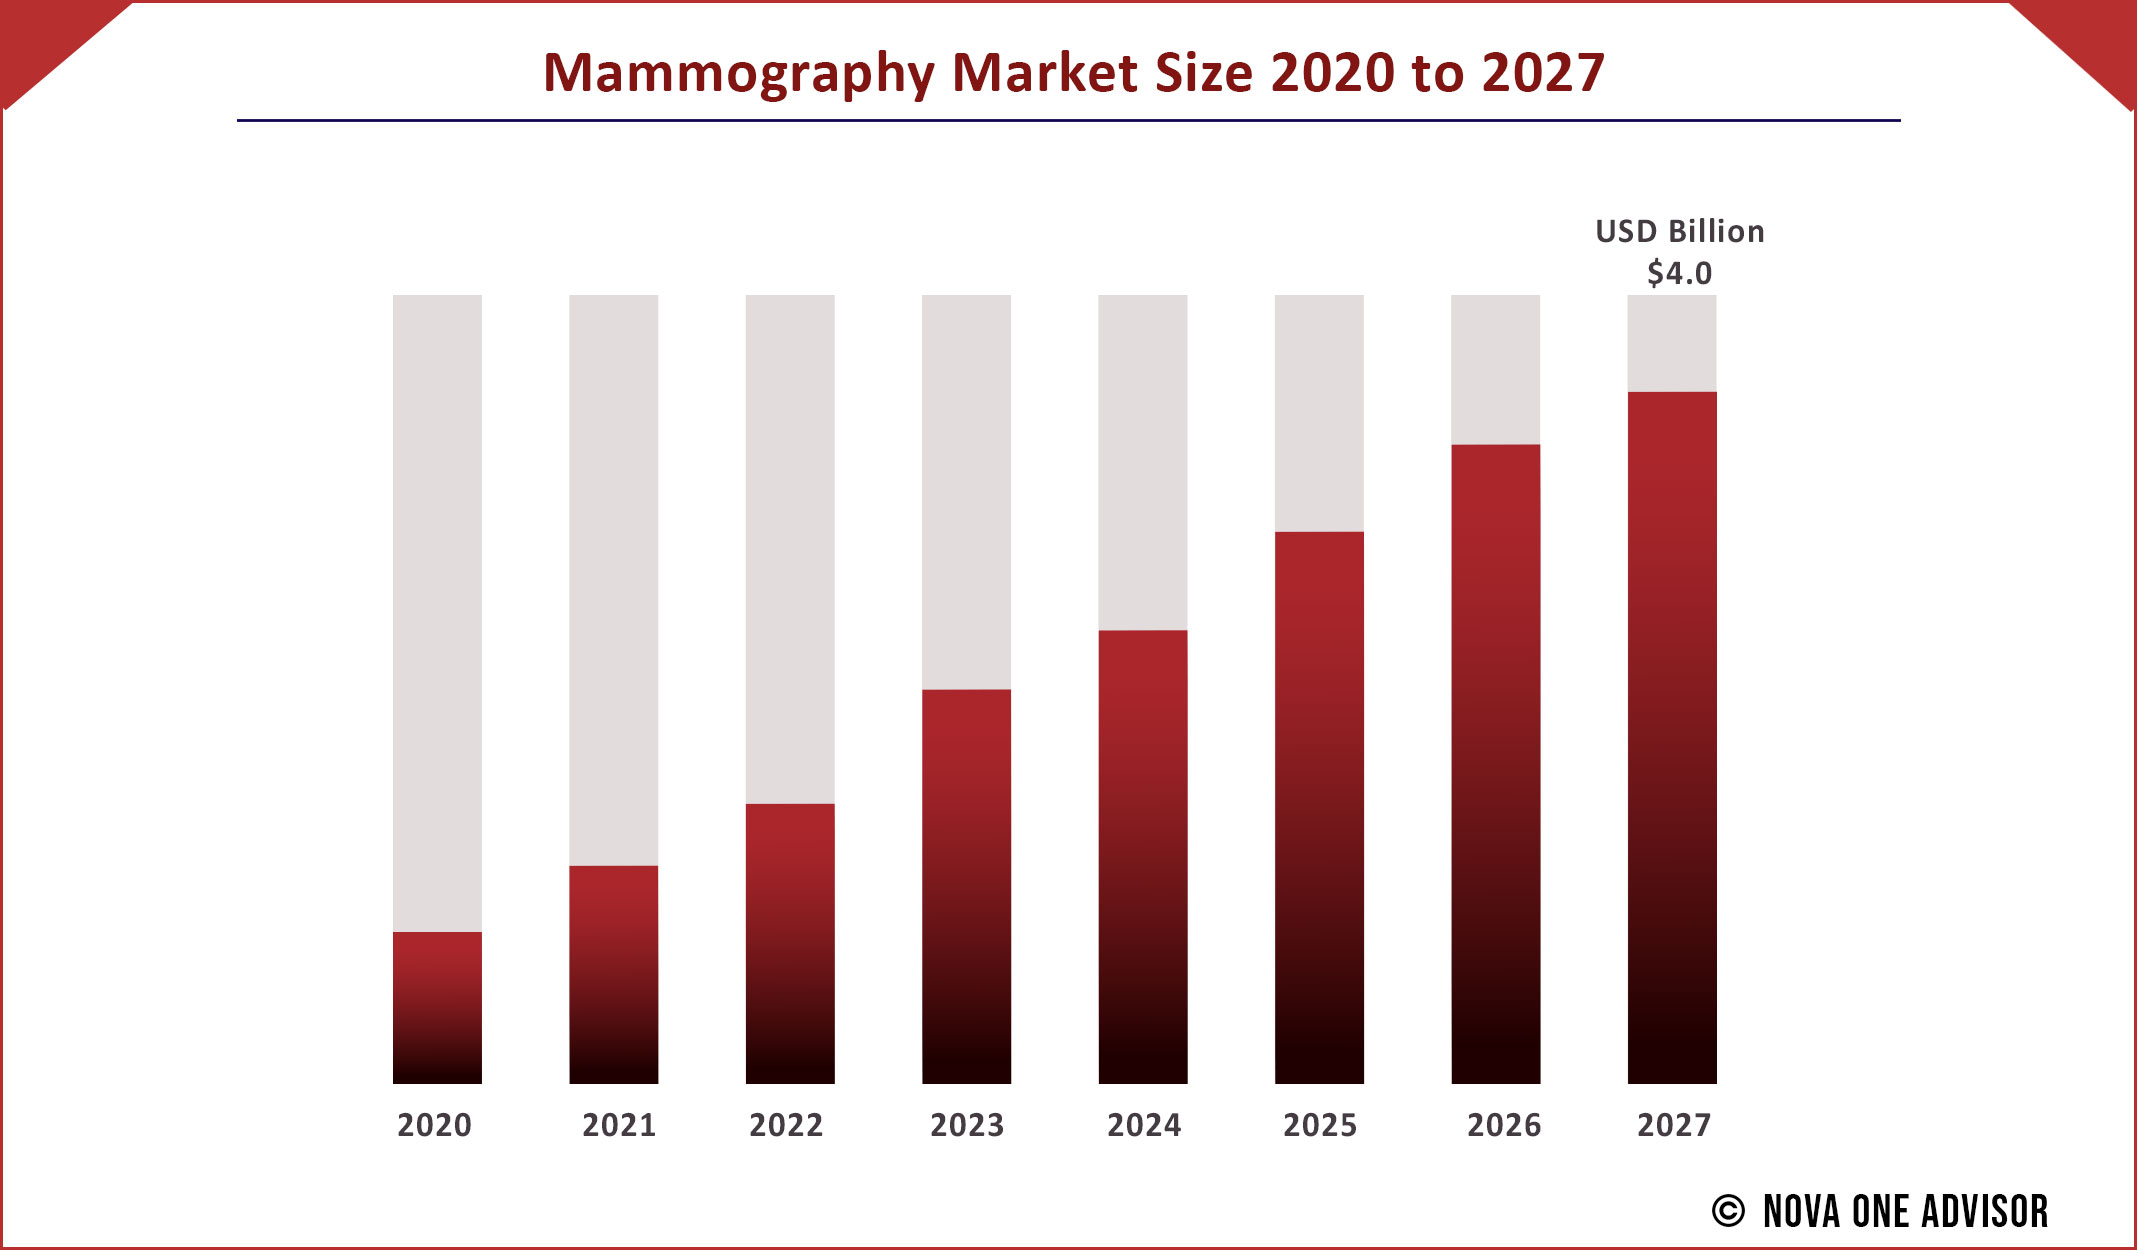 Mammography Market Size 2020 to 2027